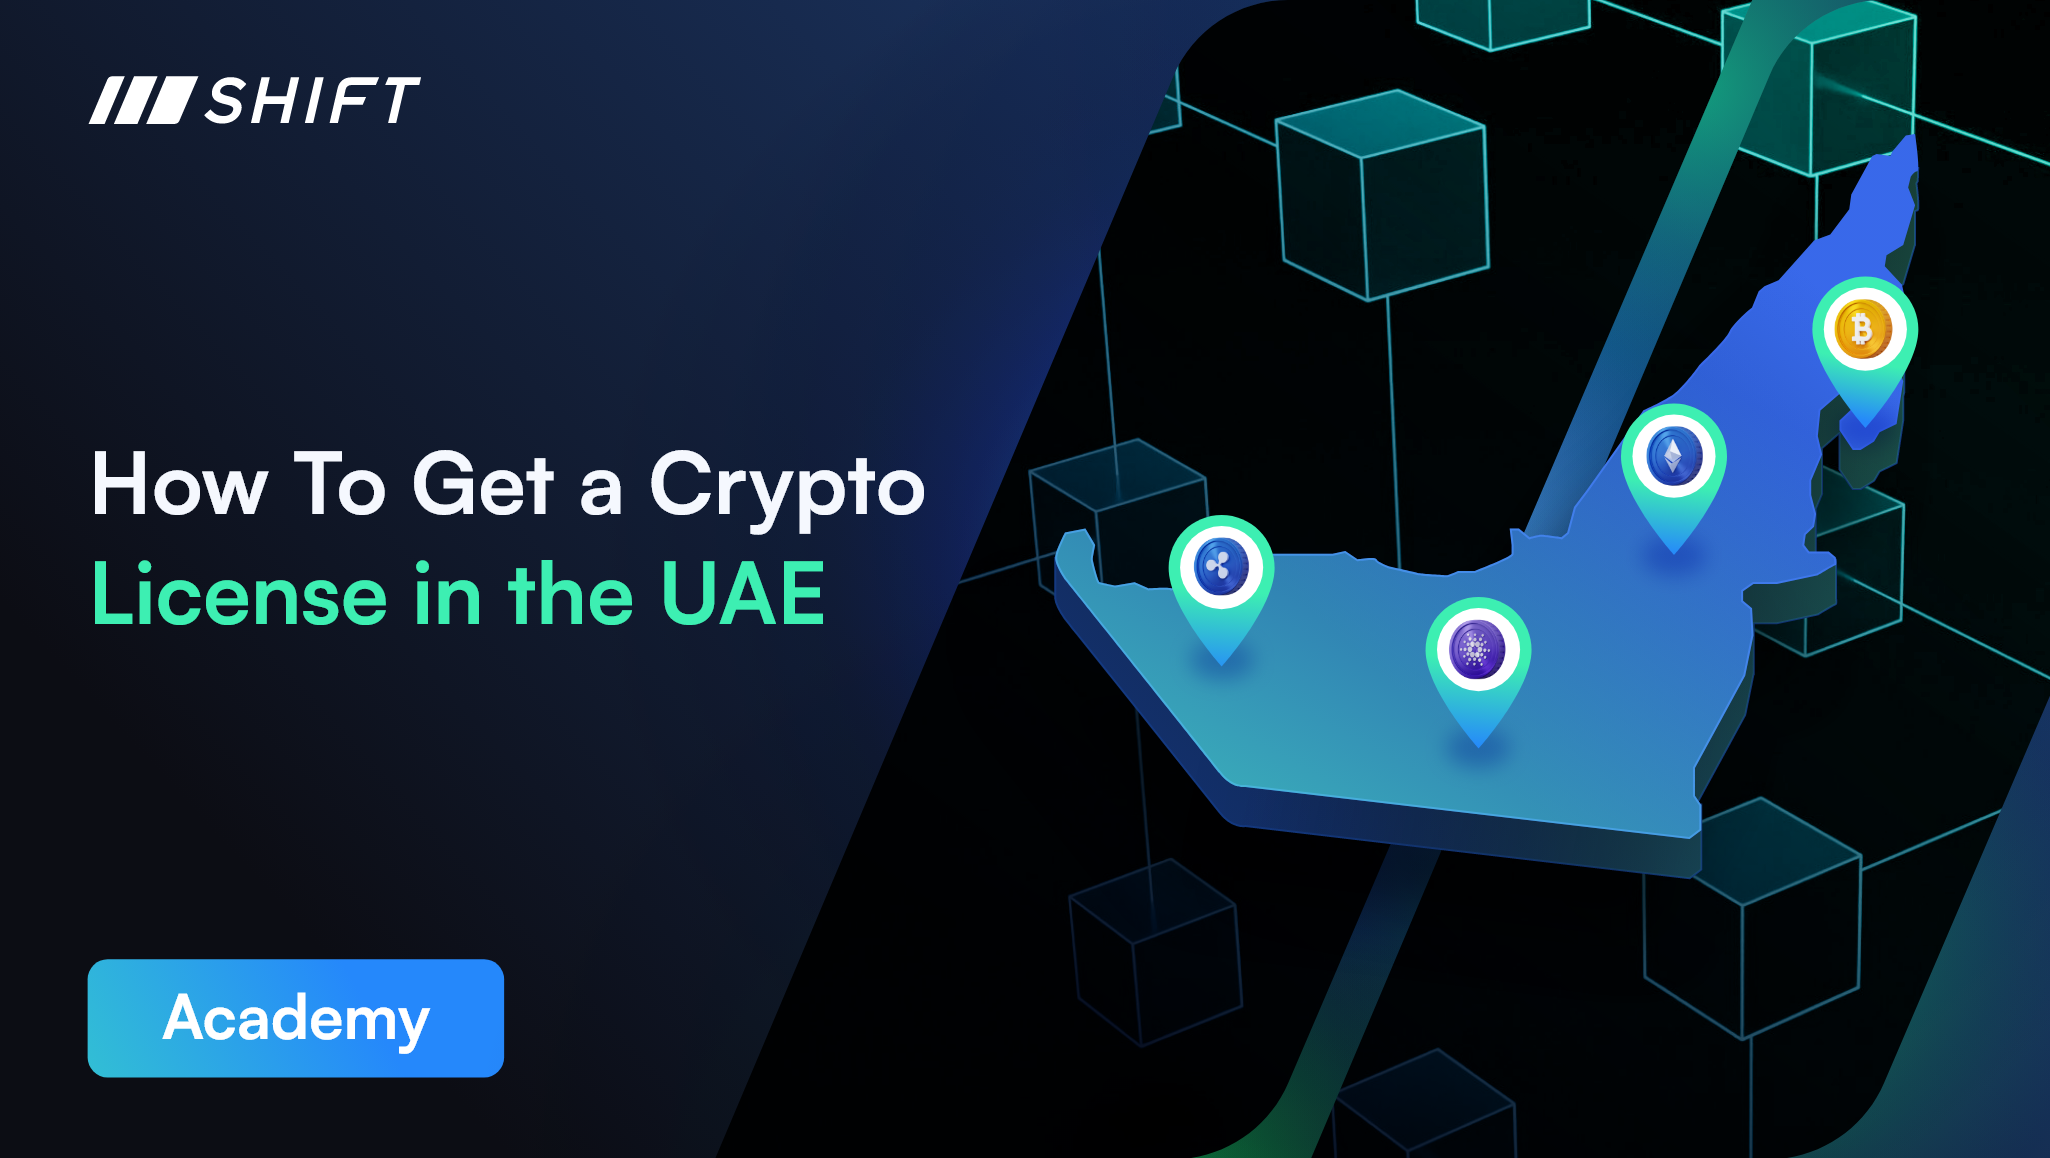 Learn the process of getting a crypto license in the UAE with Shift Markets.